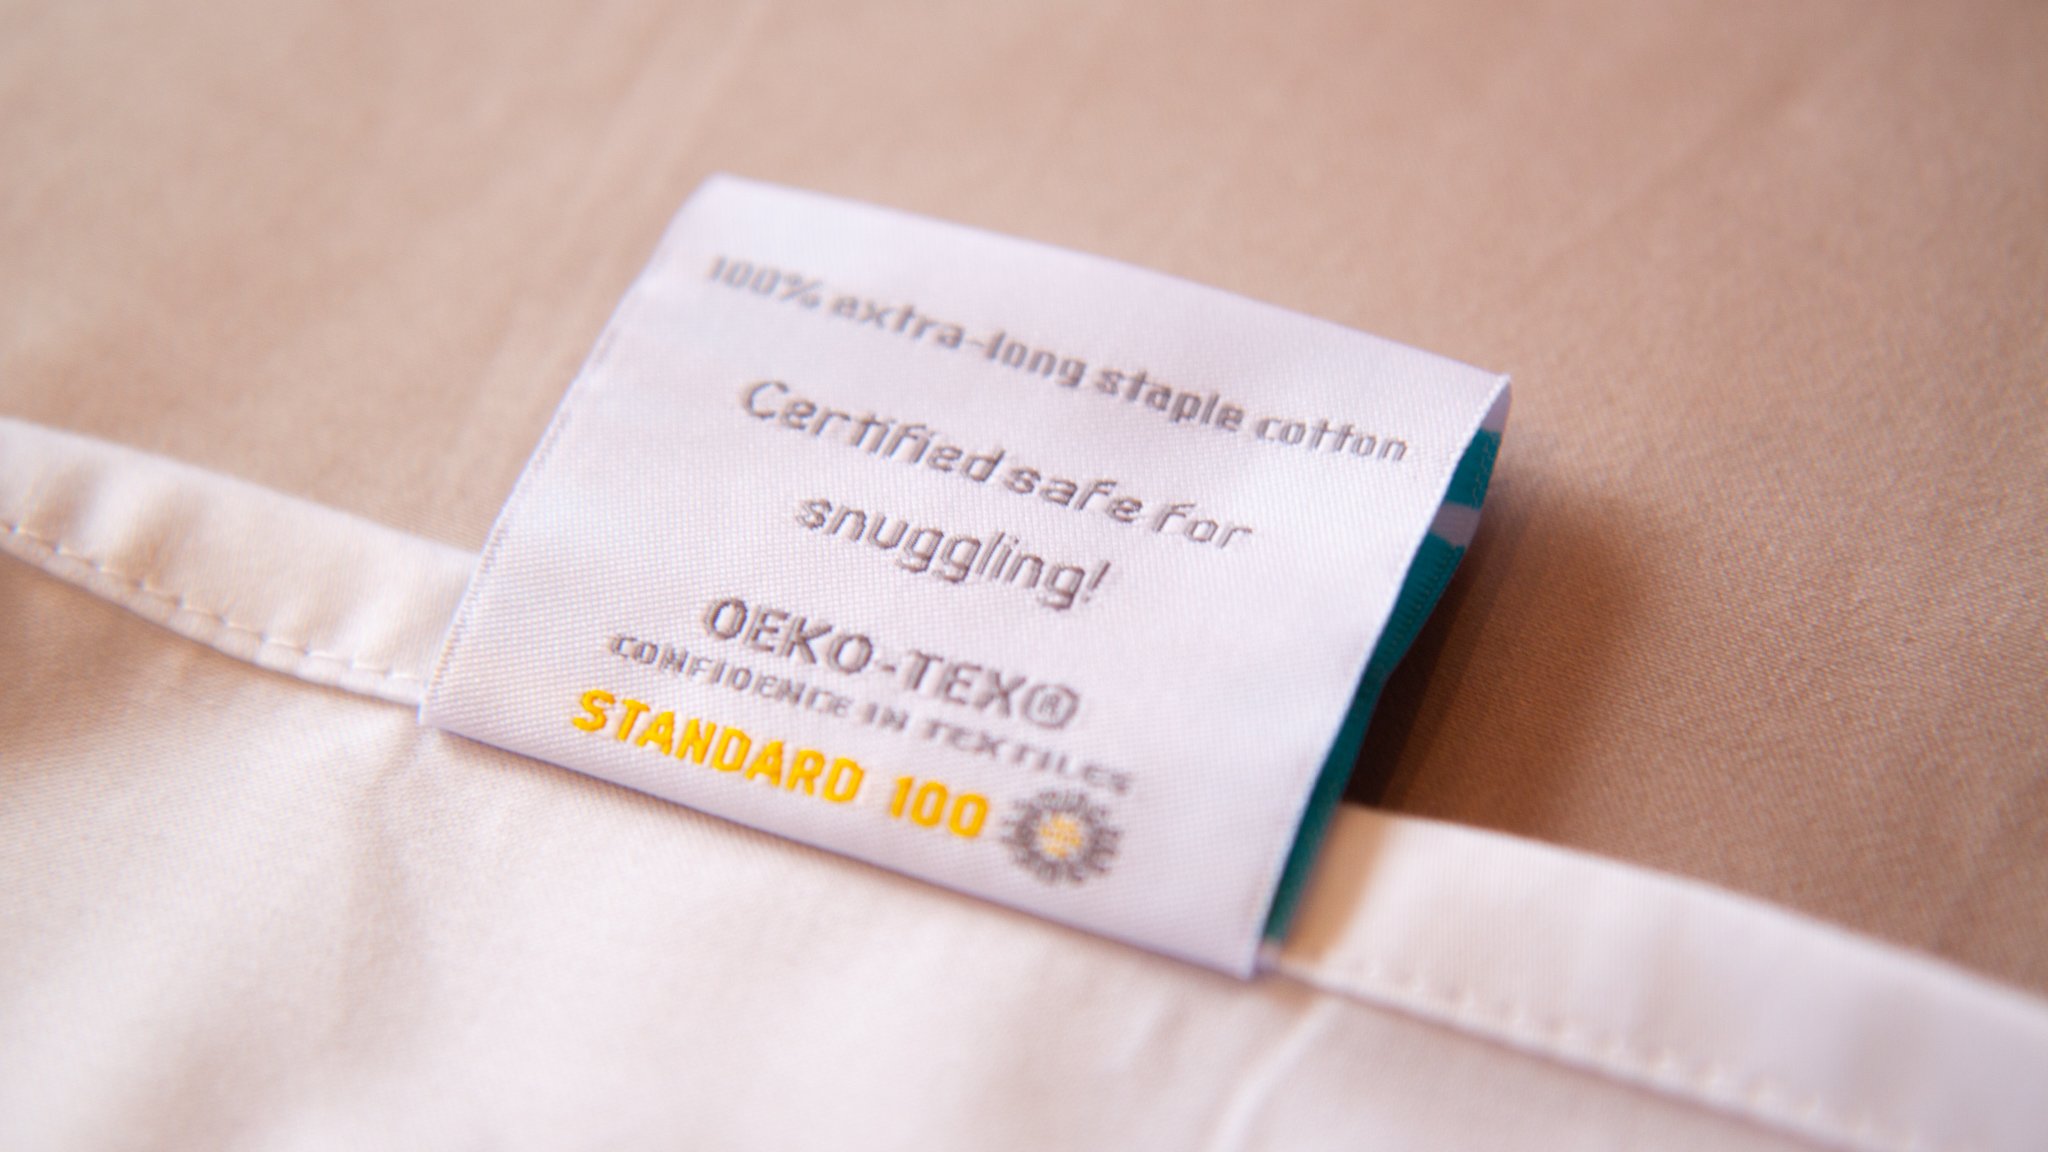 Embroidered tags to ensure long lasting